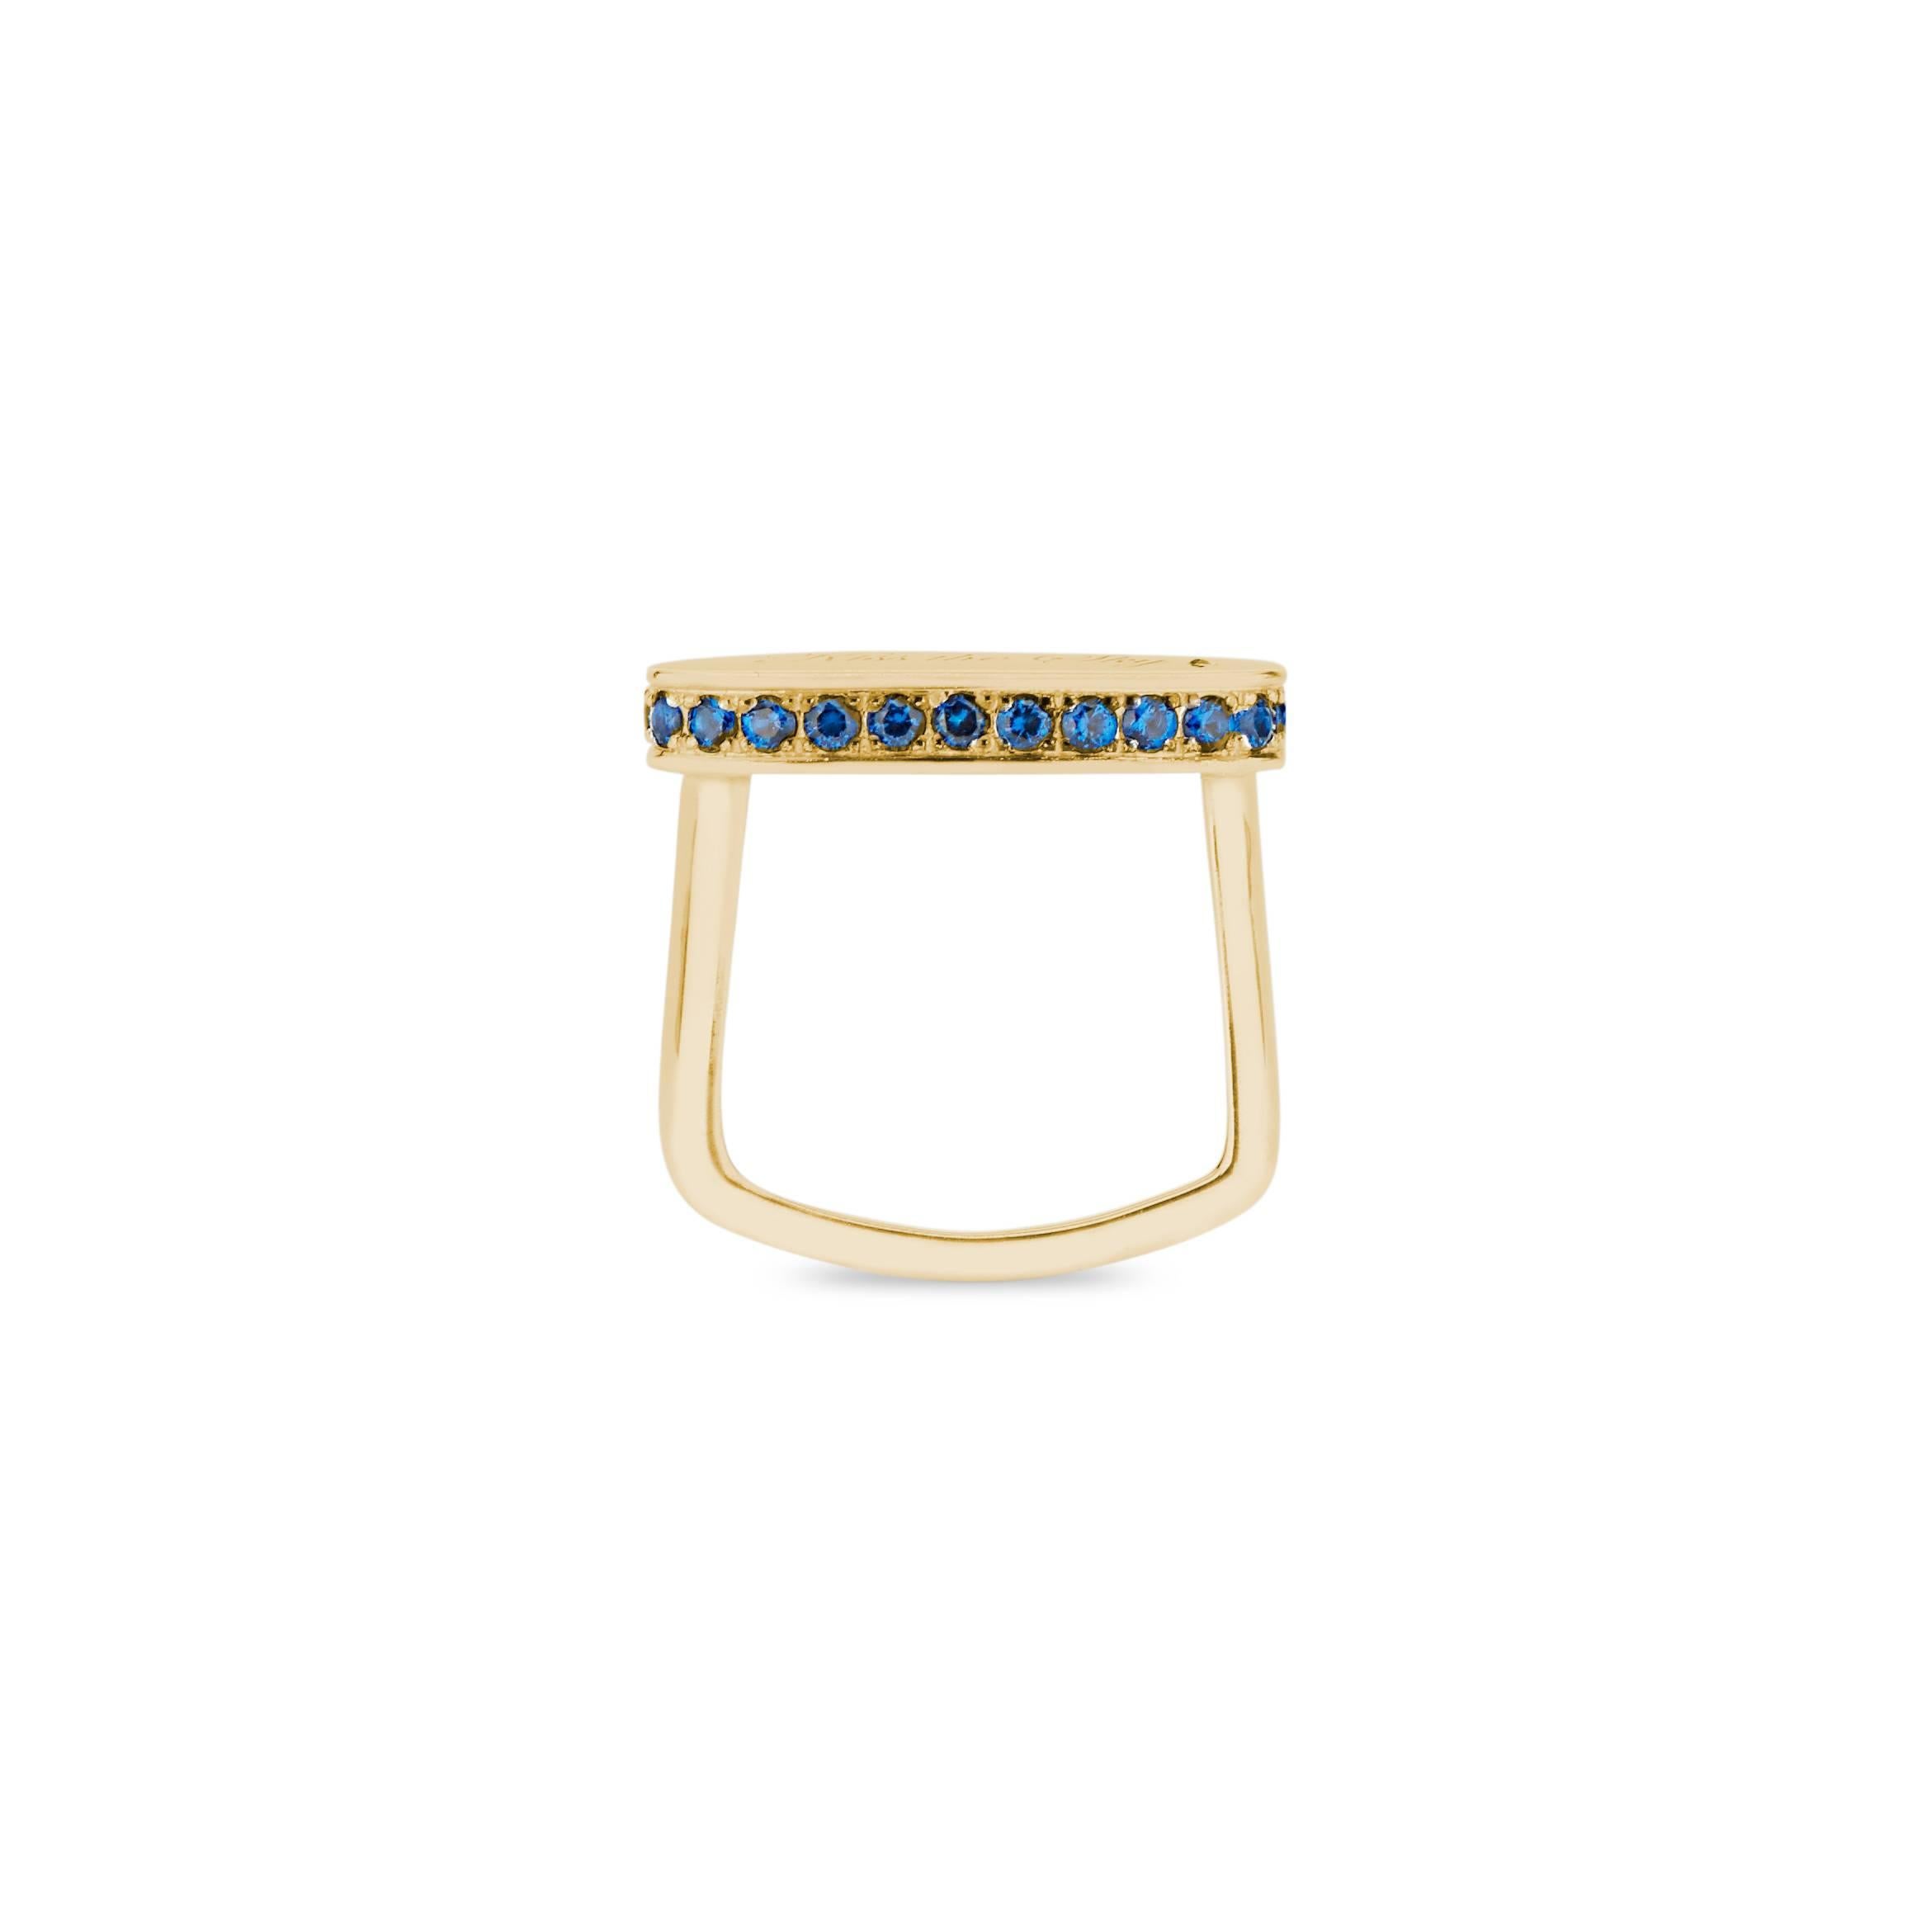 The 18k gold and blue sapphire signet ring is engraved with 